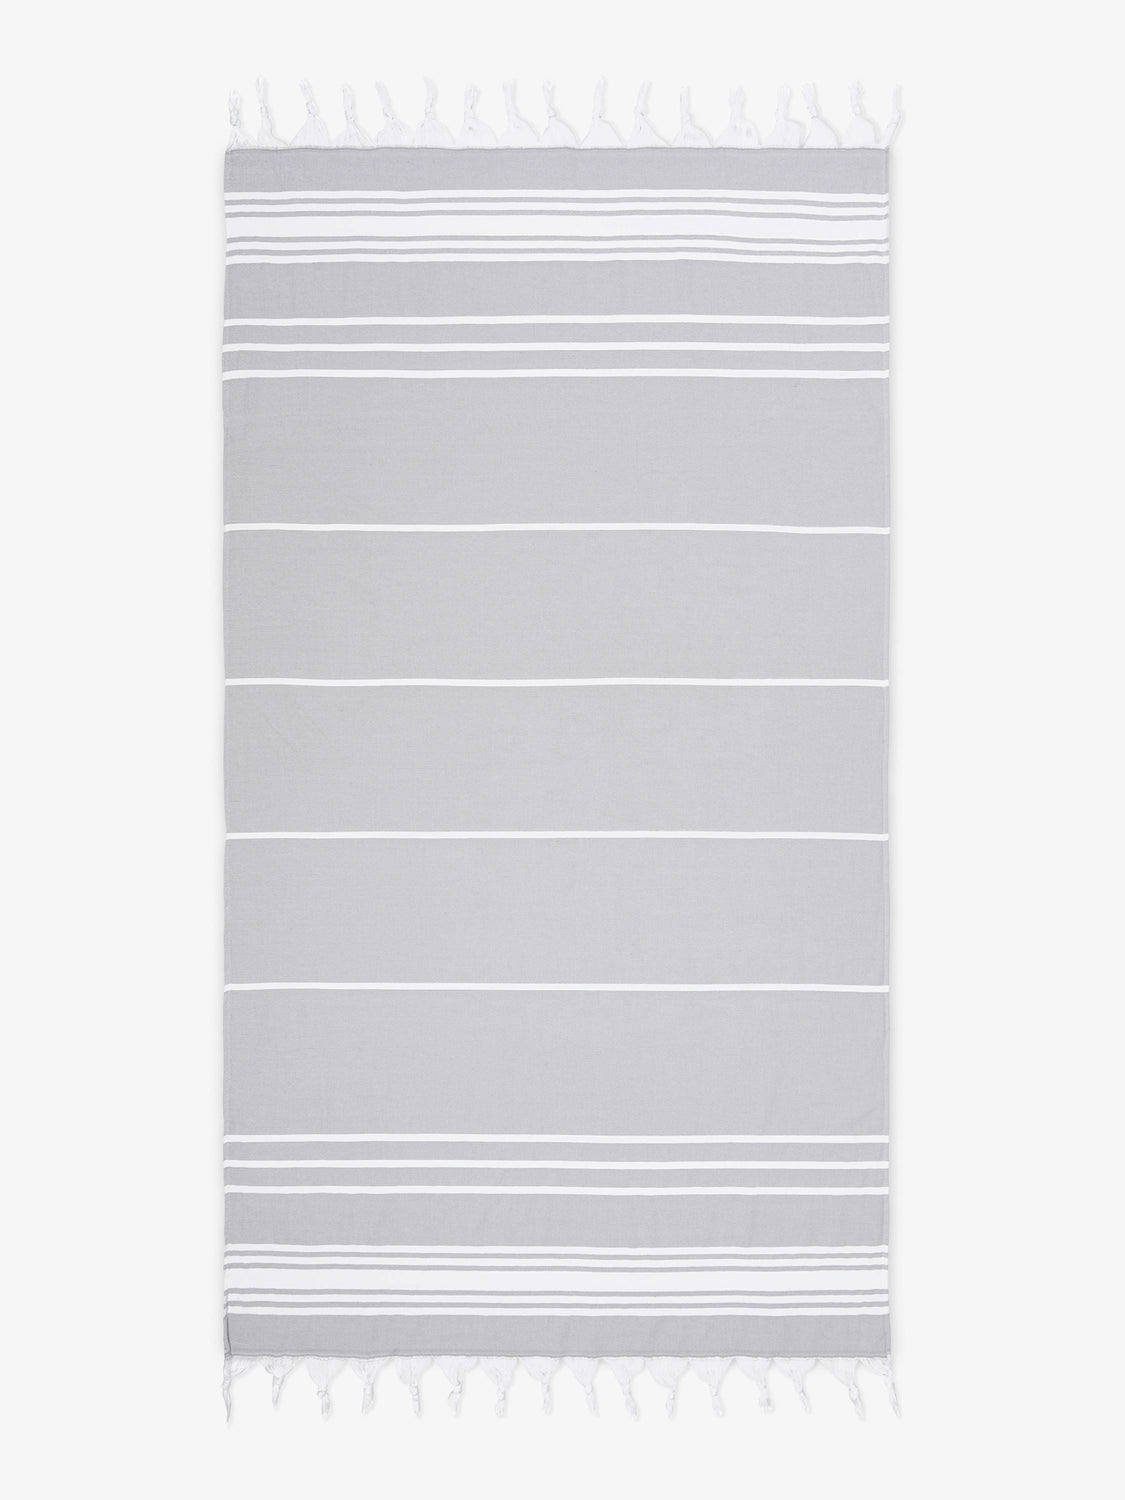 An oversized, gray and white striped Turkish cotton towel with white fringe laid out.